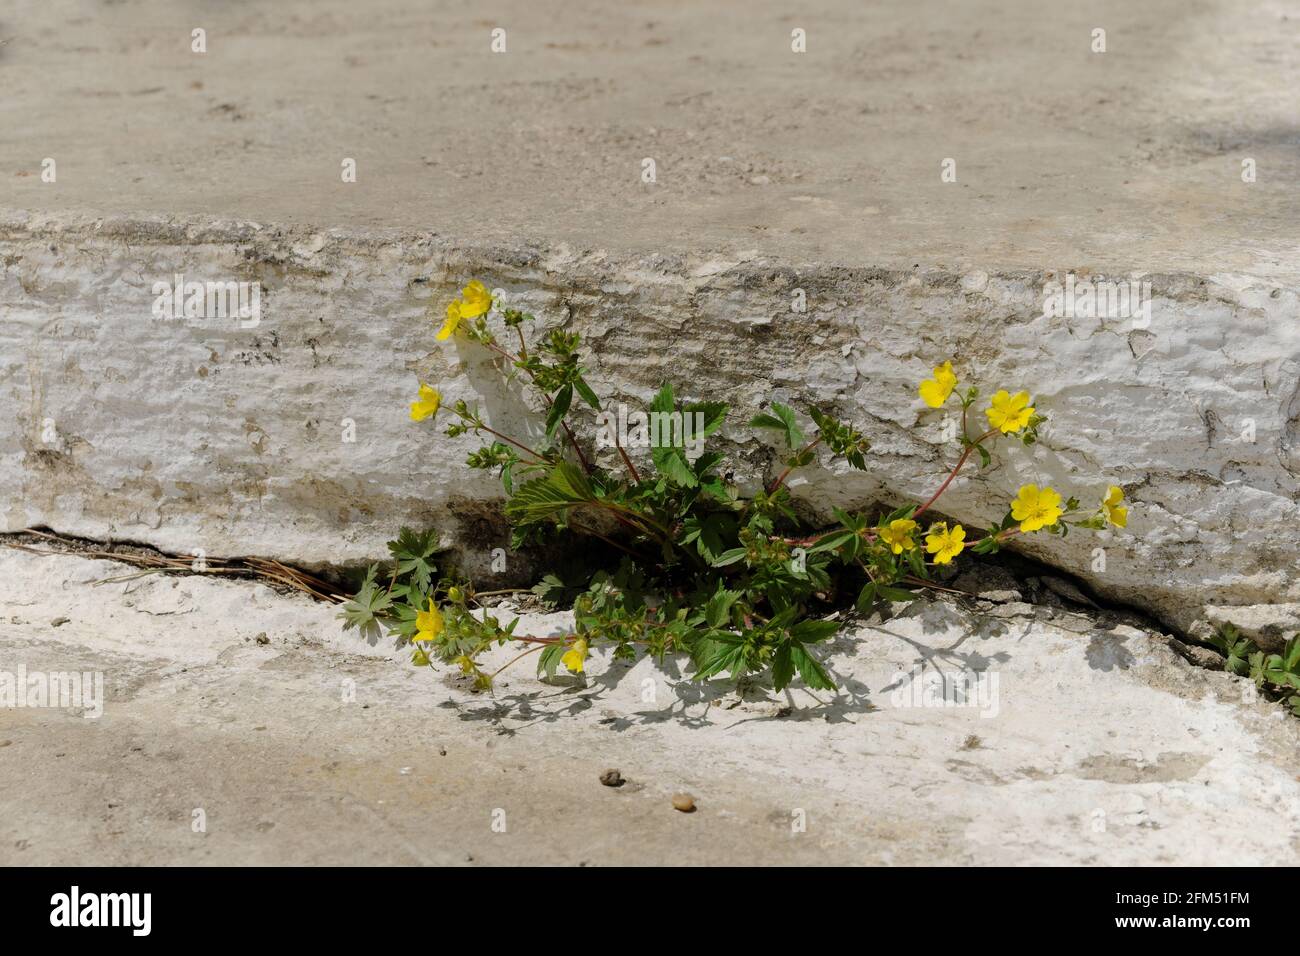 Potentilla is a species of plant in the Rosaceae family. Yellow, bright paw flowers sprouted between the concrete slabs. Selective focus. Stock Photo